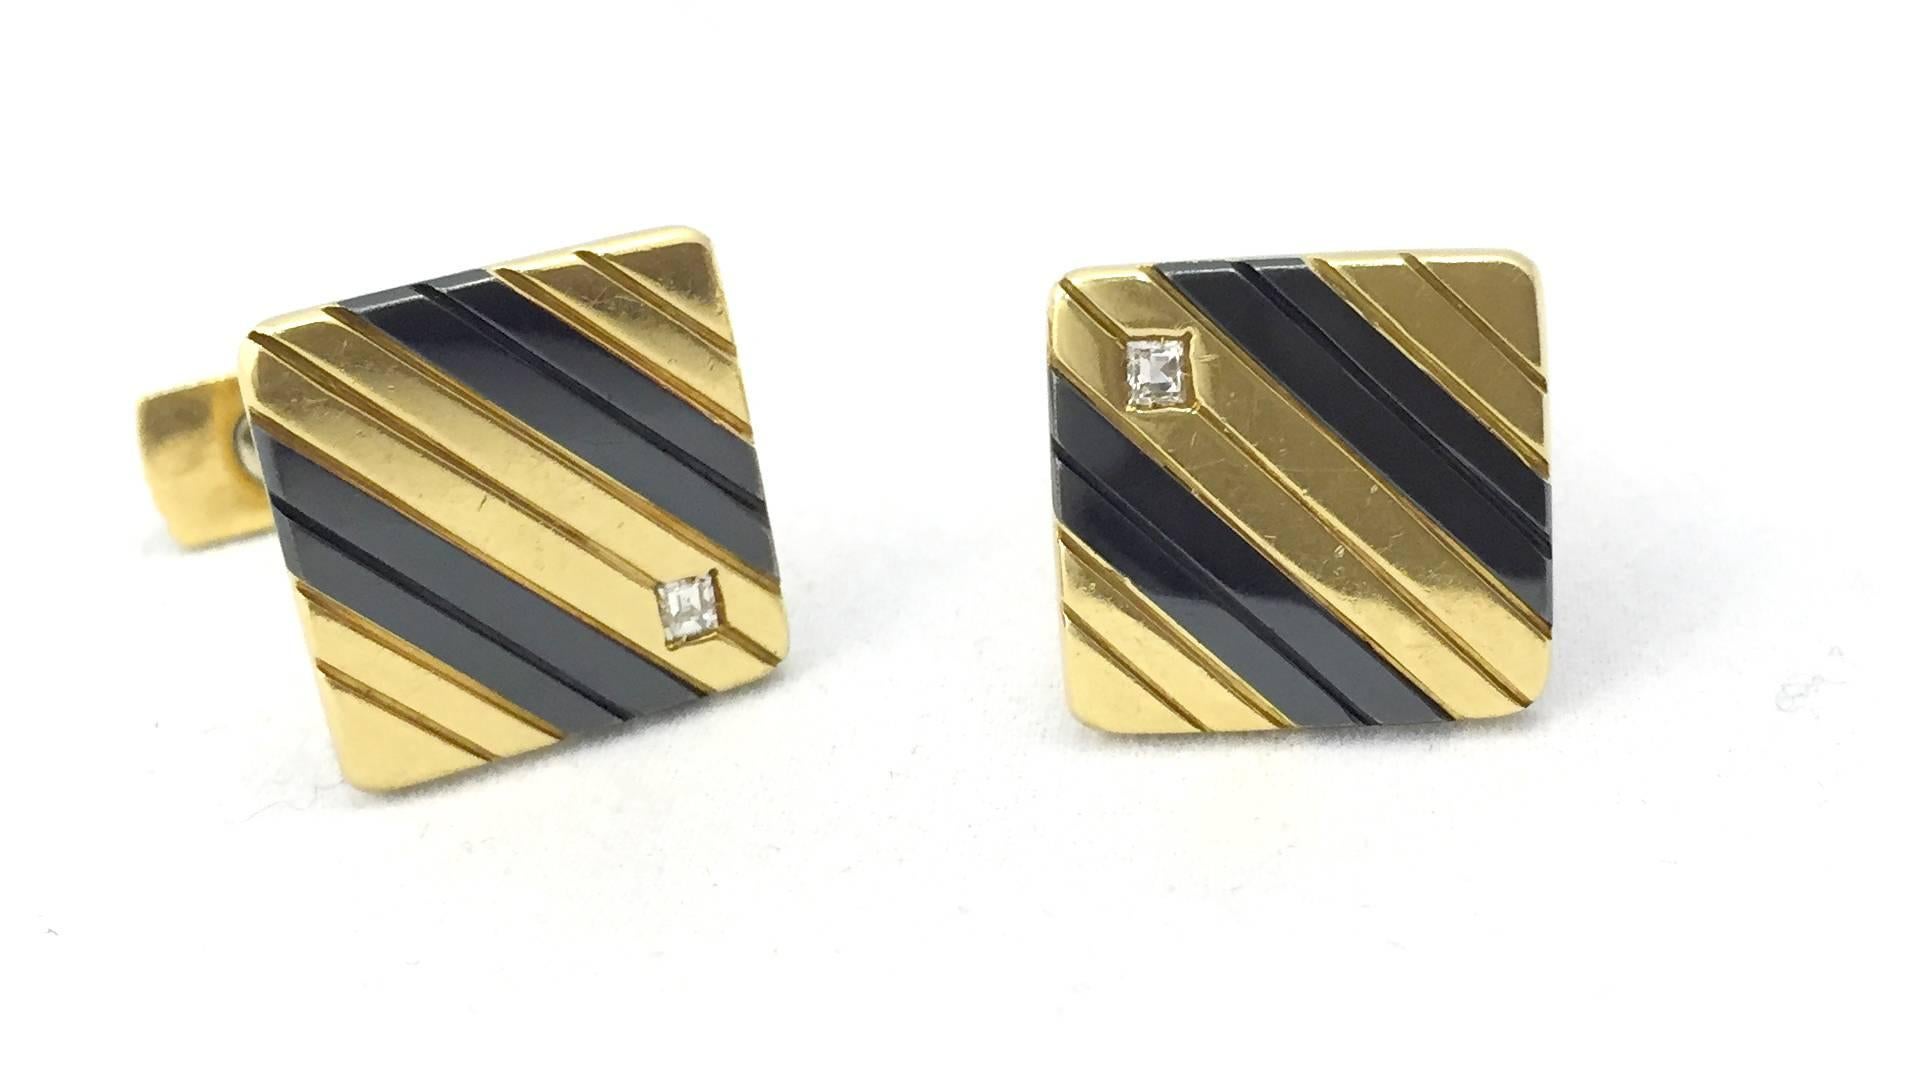 A squared pair of 14kt gold cufflinks decorated with diagonal black enamel sectioning, highlighted with two small squared cut diamonds. Circa 1960 